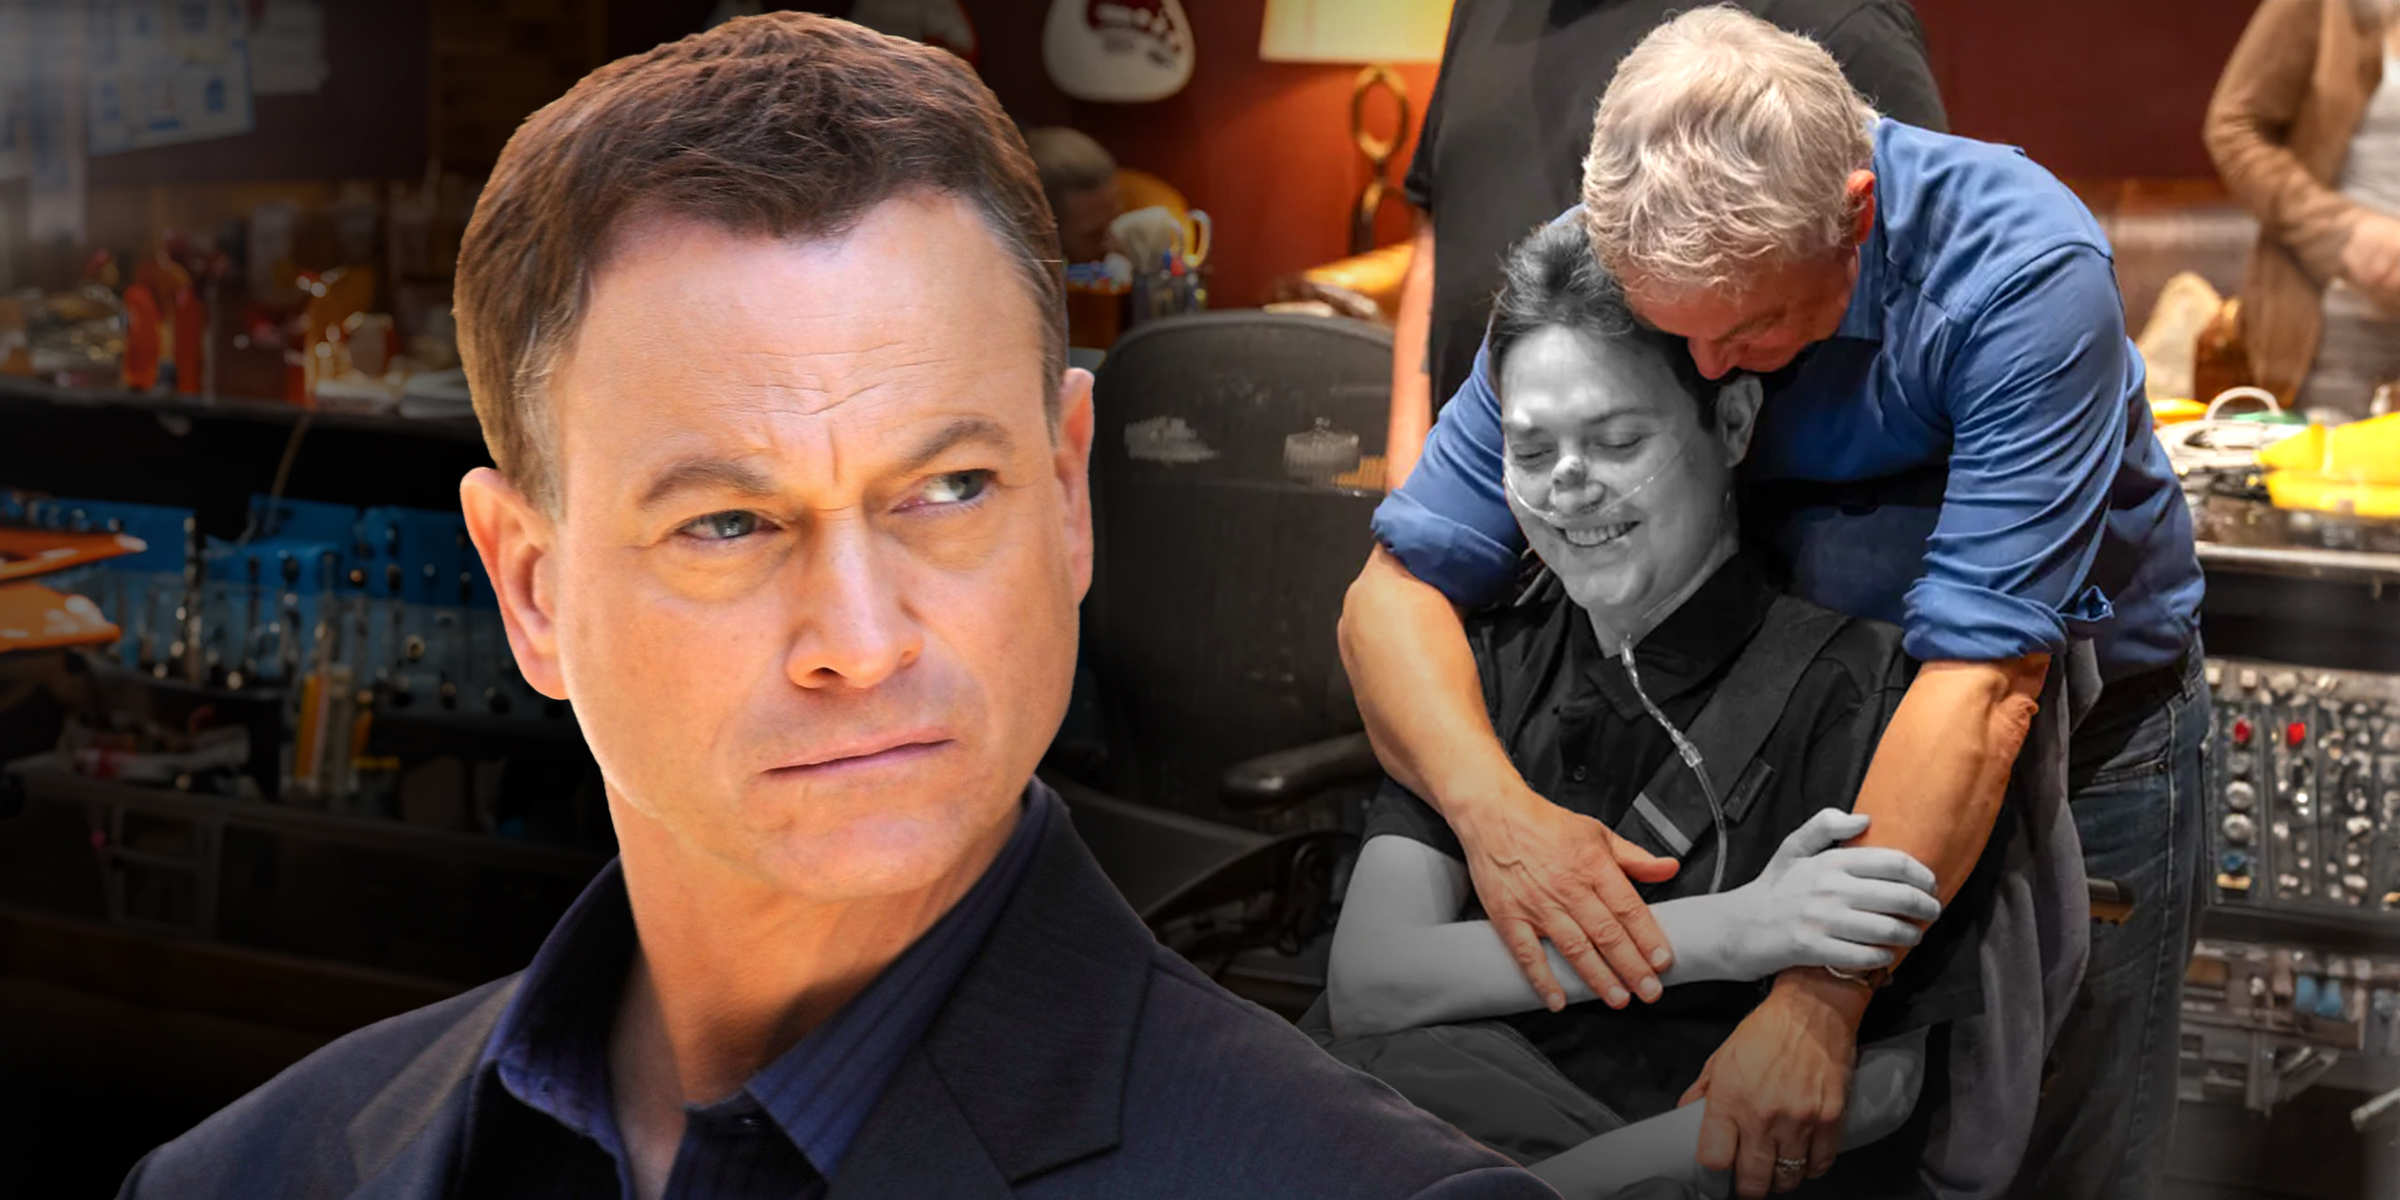 Gary Sinise | Gary and Mac Sinise | Source: Getty Images | Twitter/PageSix